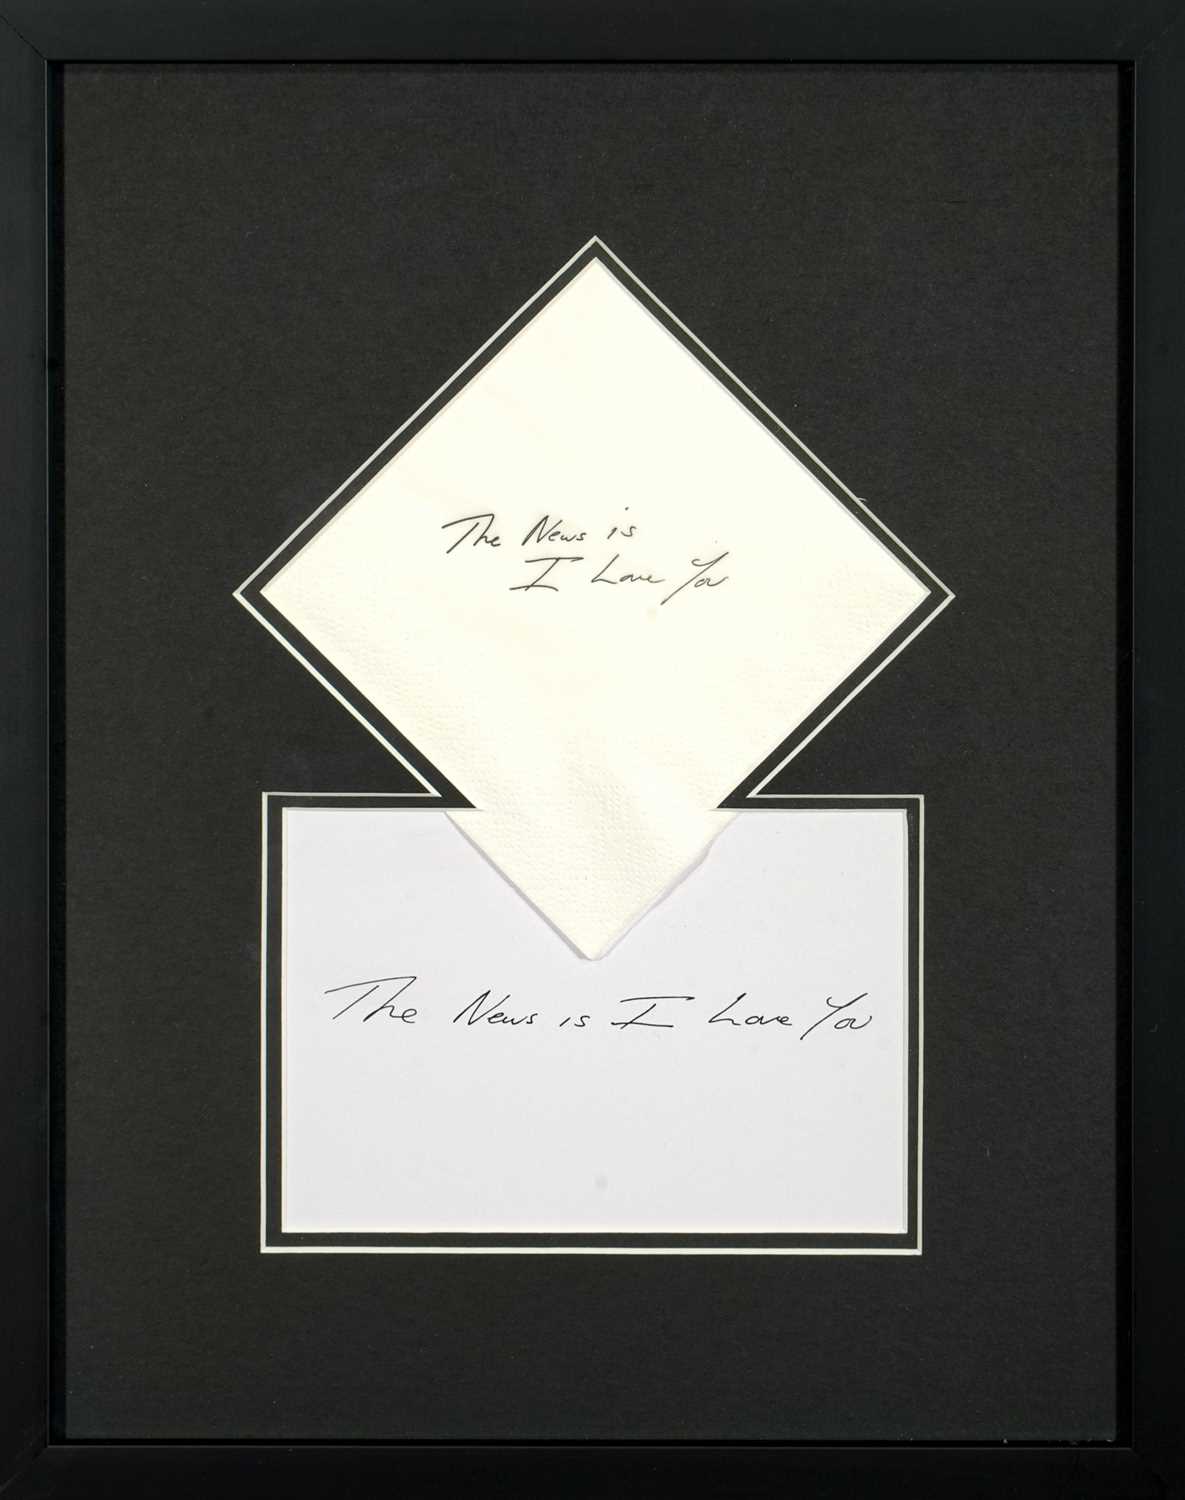 Lot 81 - Tracey Emin (British 1963-), 'The News Is I Love You', 2021